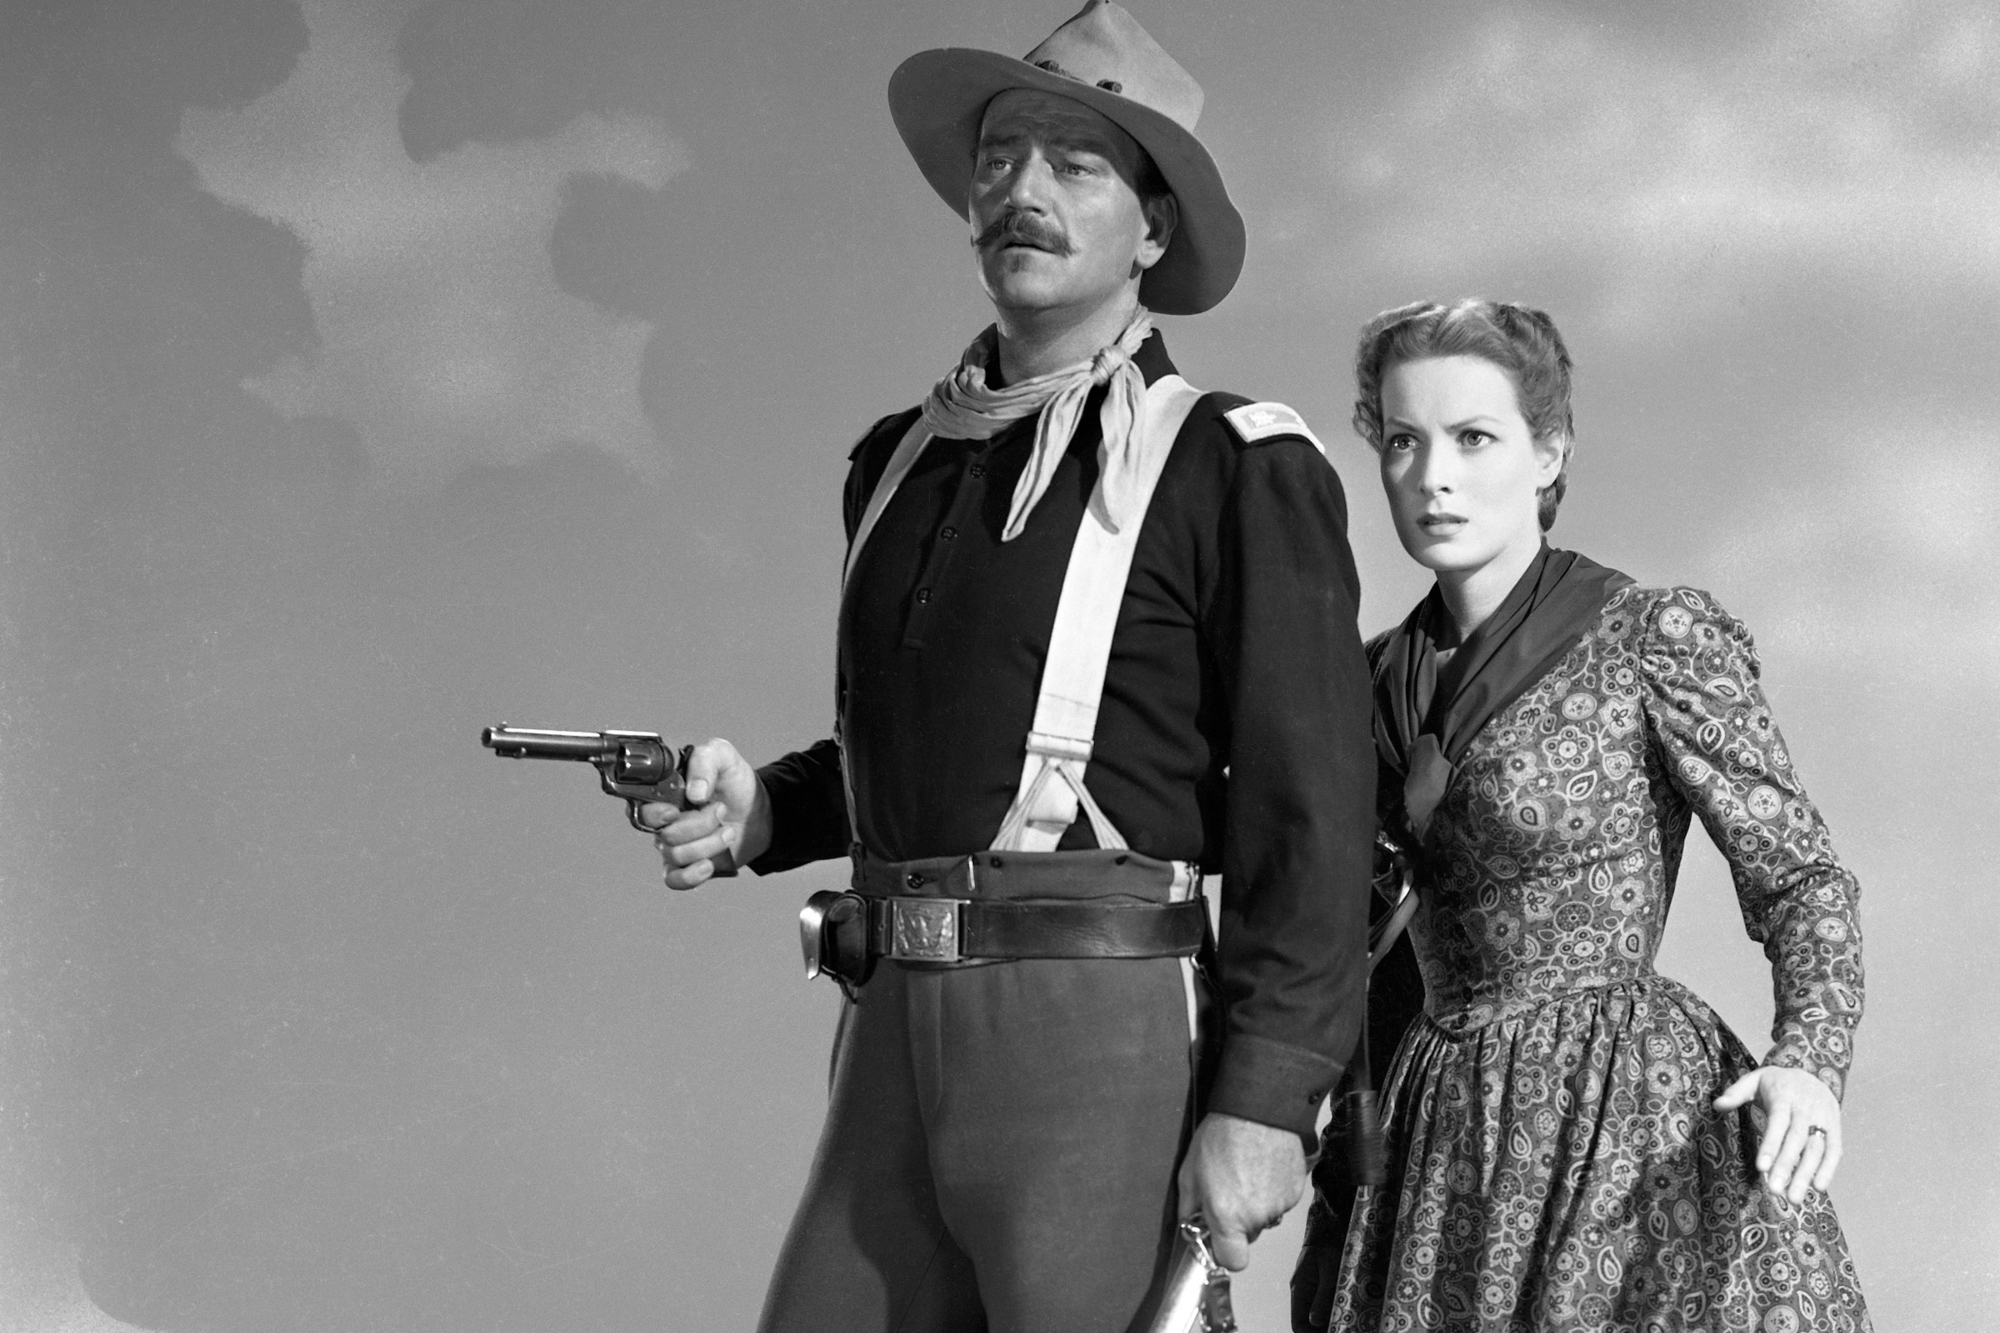 Maureen O’Hara Explained Why She Was the Only Woman ‘Tough Enough’ to Act With John Wayne